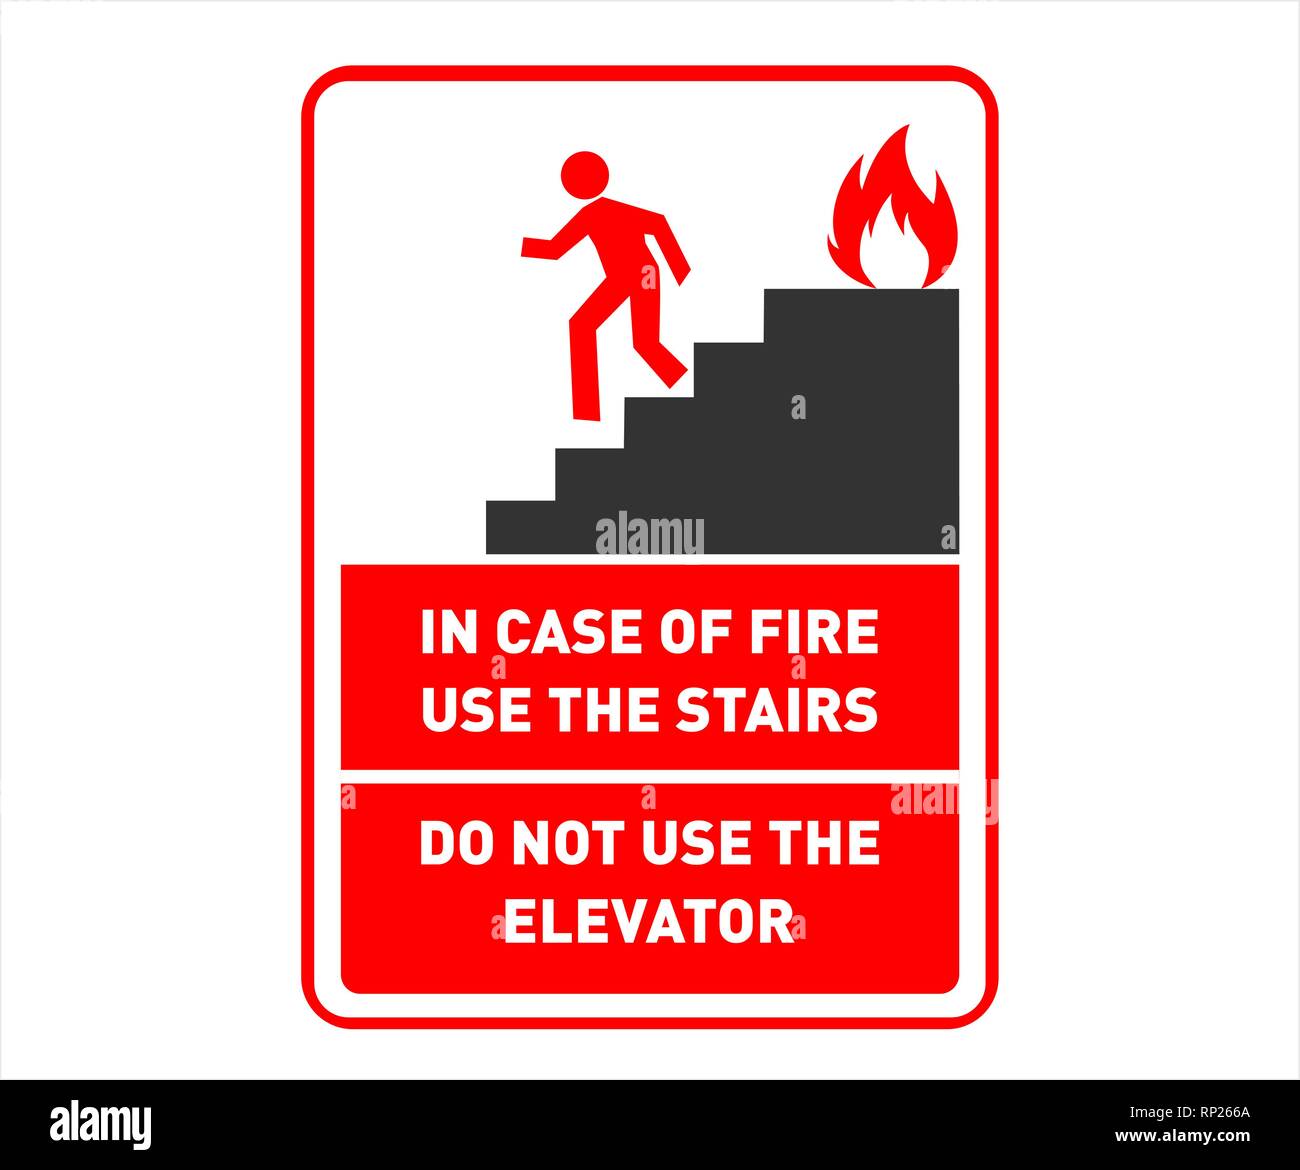 Fire Evacuation Safety Sign/Poster Advising People to Use Stairs. Printable safety illustration sign. Stock Vector